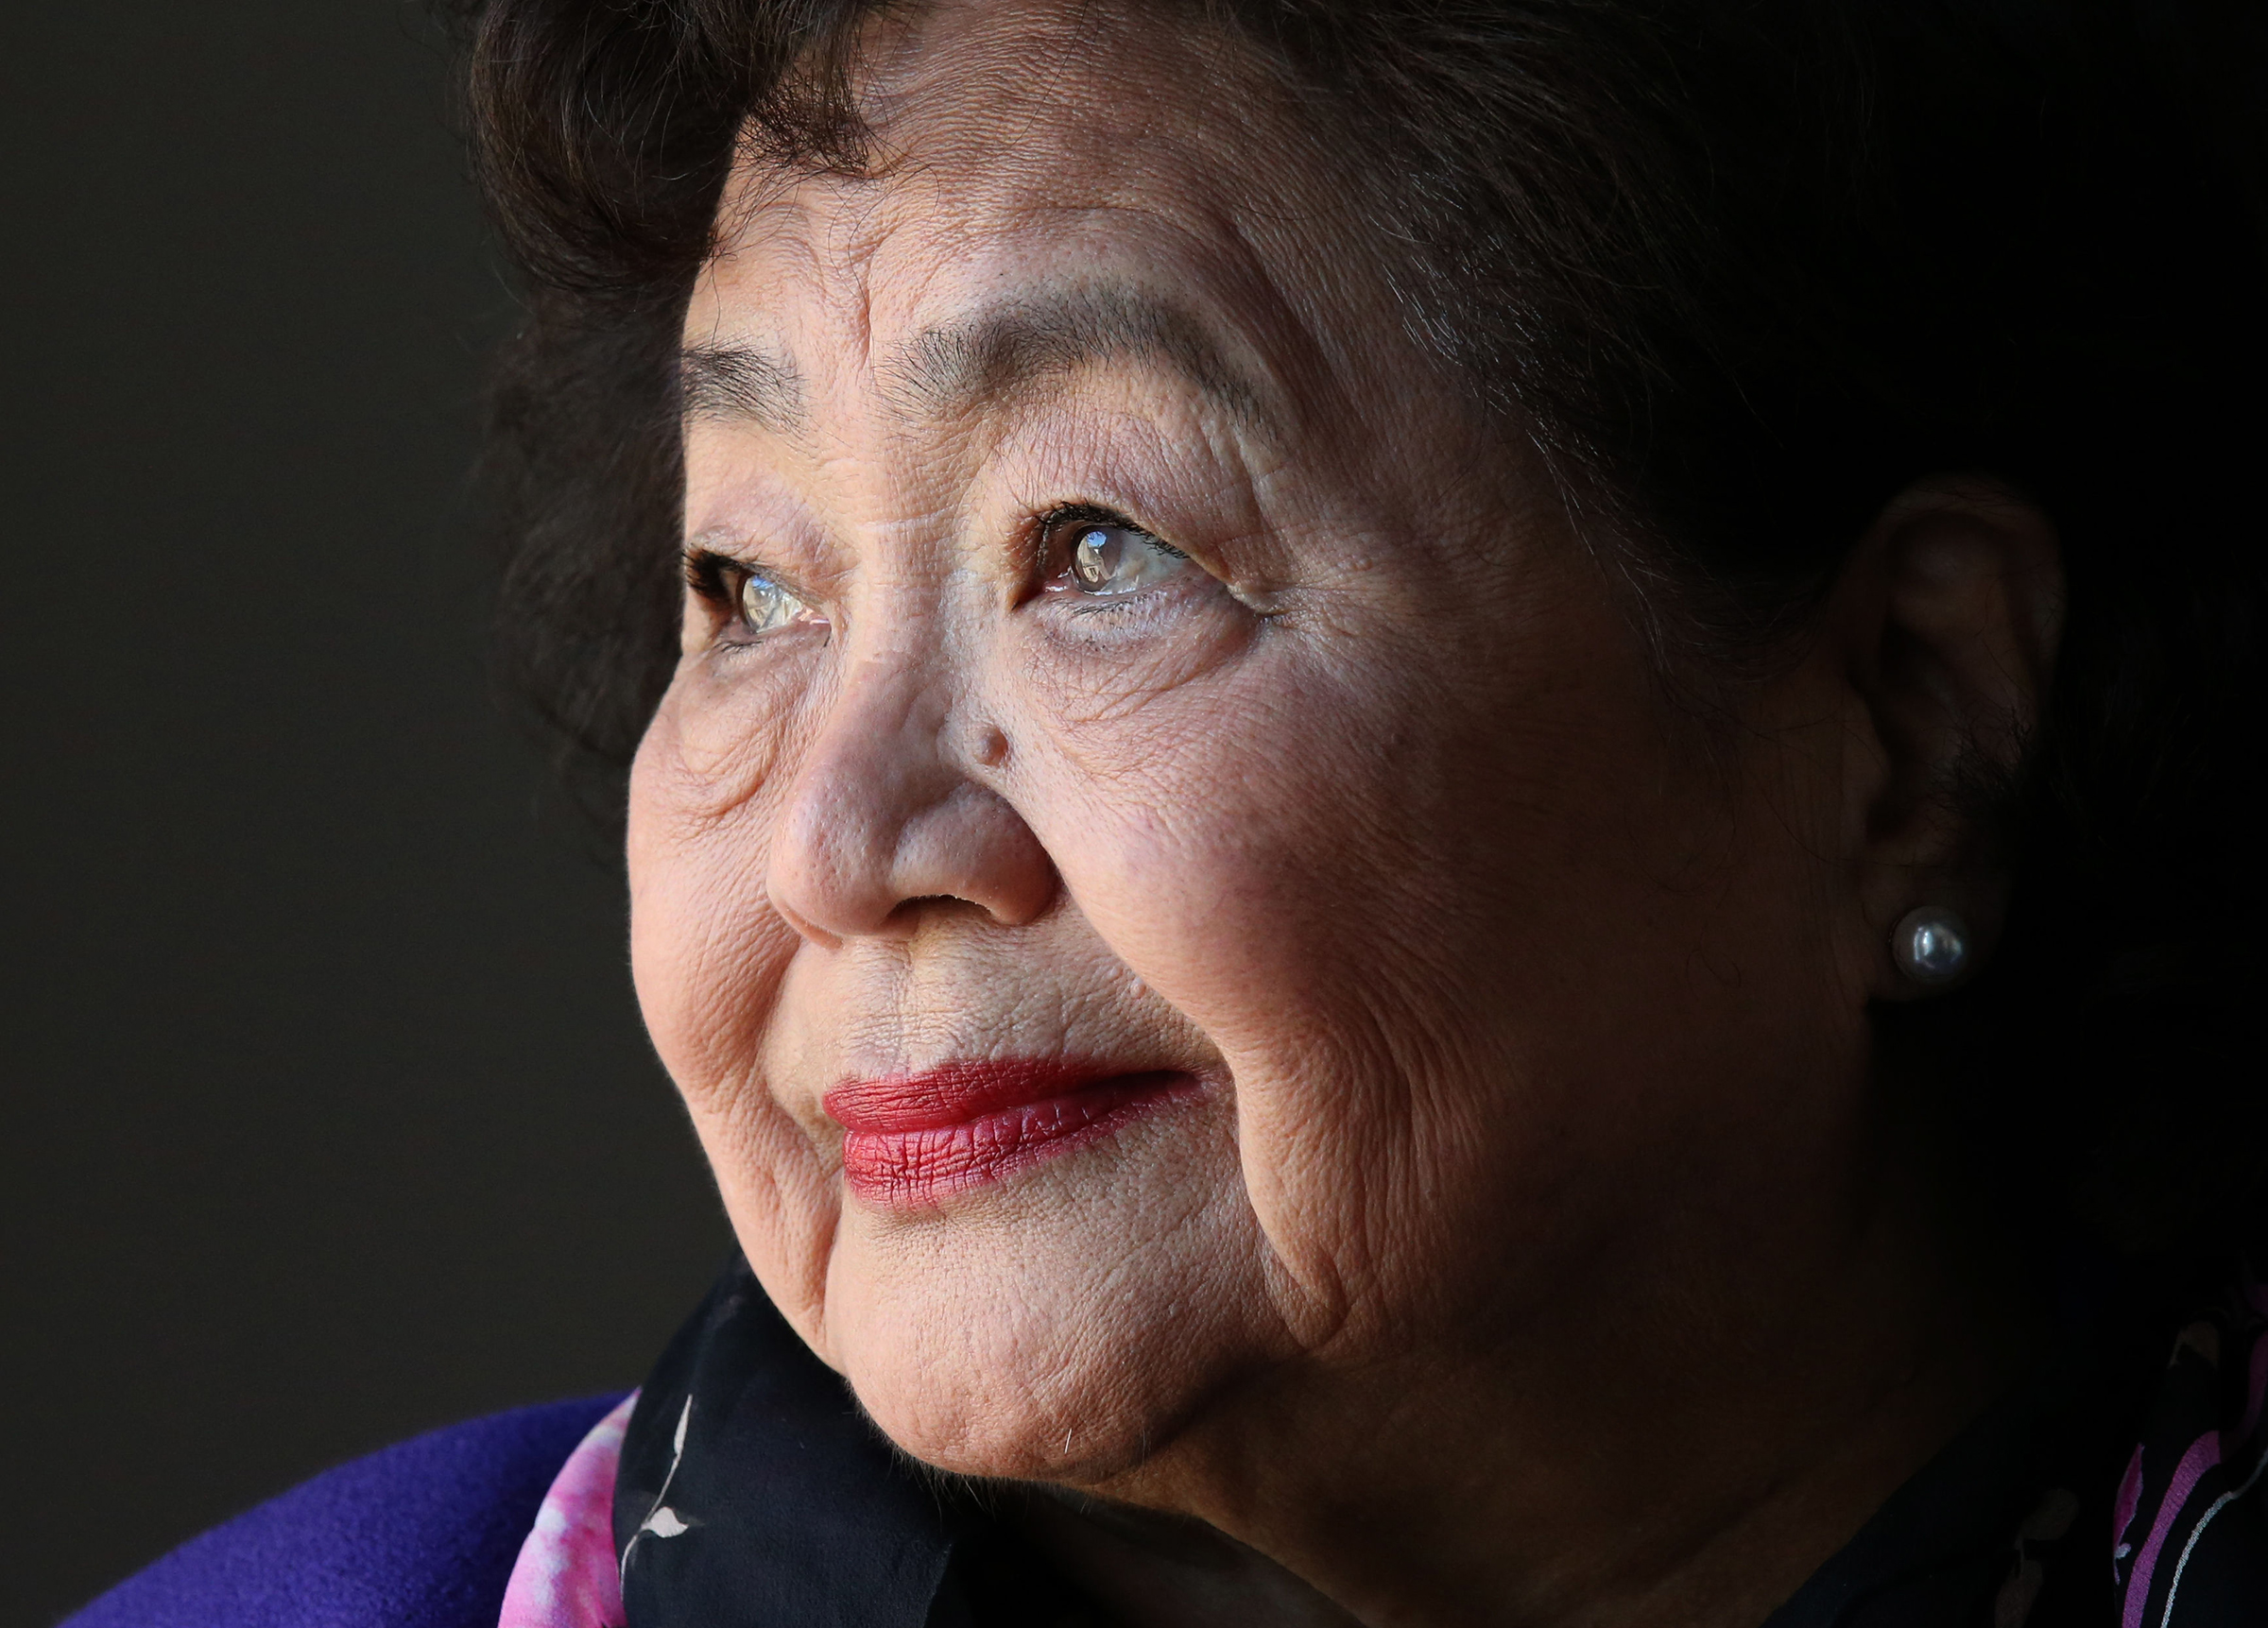 Hiroshima survivor Setsuko Thurlow in Edinburgh, Scotland, May 2016, for a campaign against nuclear weapons. (PA Archive/PA Images)